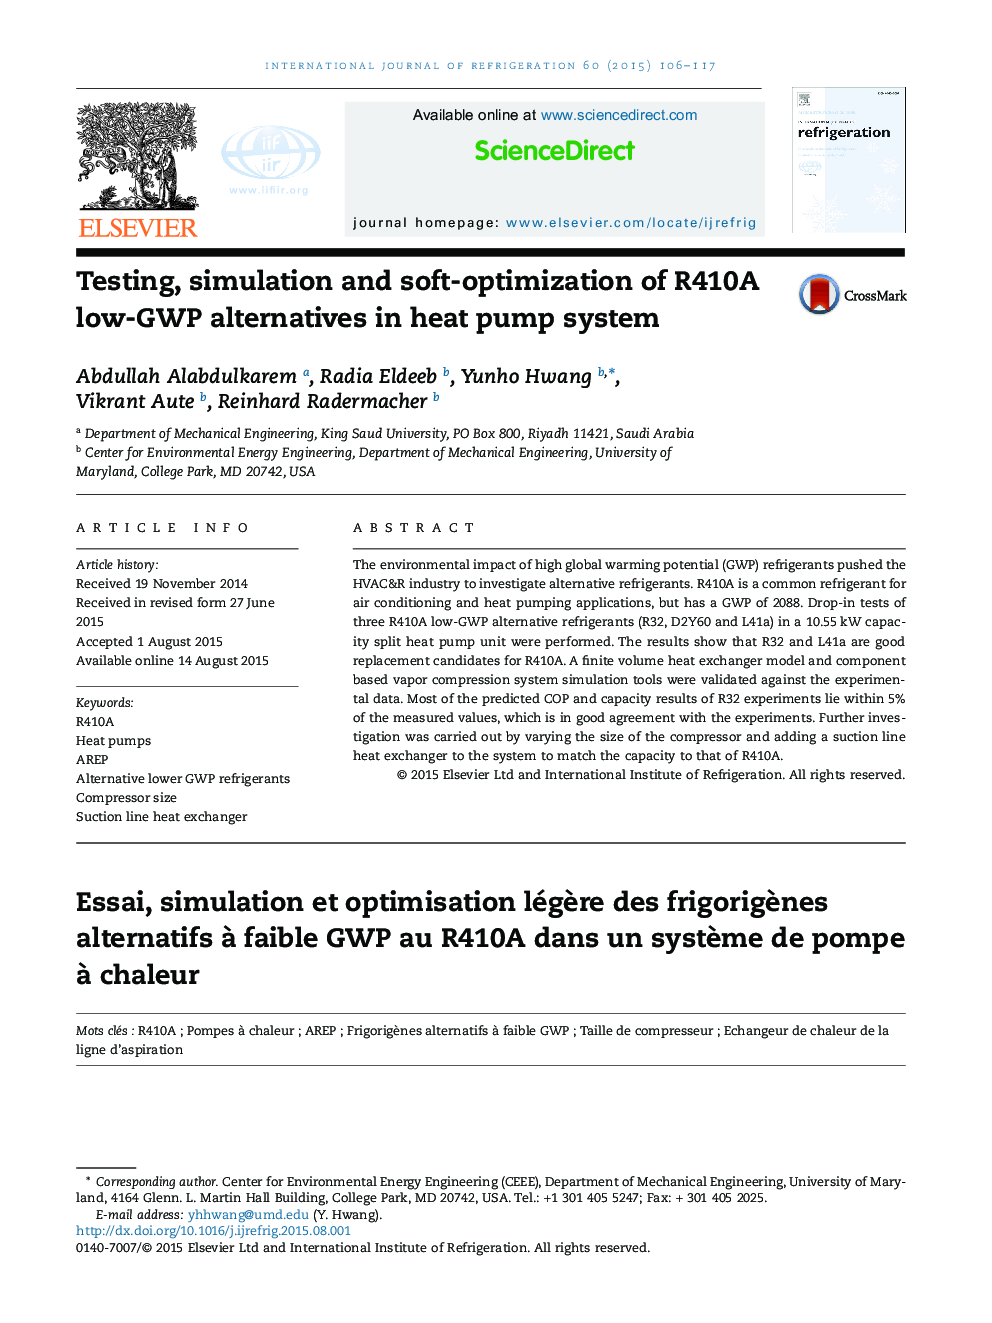 Testing, simulation and soft-optimization of R410A low-GWP alternatives in heat pump system